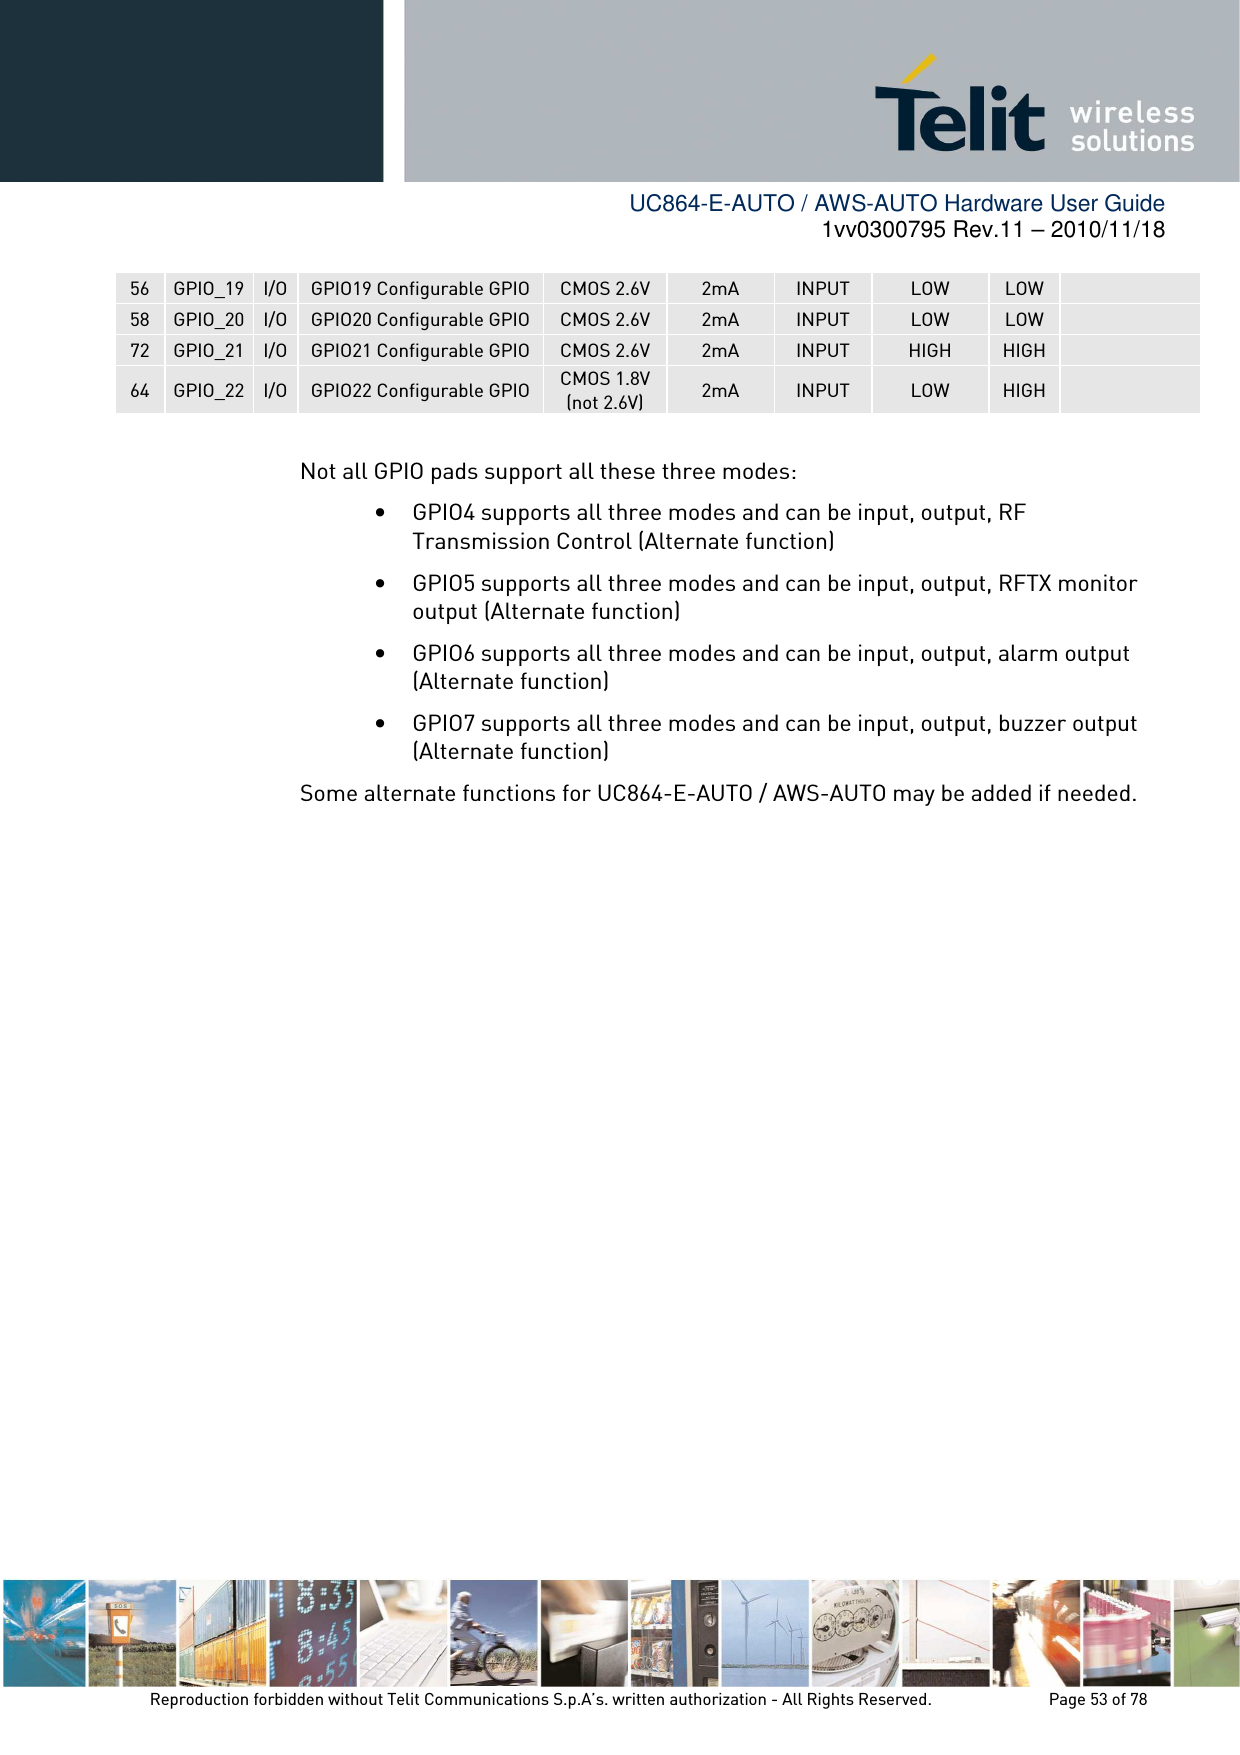        UC864-E-AUTO / AWS-AUTO Hardware User Guide 1vv0300795 Rev.11 – 2010/11/18     Reproduction forbidden without Telit Communications S.p.A’s. written authorization - All Rights Reserved.    Page 53 of 78  56  GPIO_19 I/O GPIO19 Configurable GPIO  CMOS 2.6V  2mA  INPUT  LOW  LOW   58  GPIO_20 I/O GPIO20 Configurable GPIO  CMOS 2.6V  2mA  INPUT  LOW  LOW   72  GPIO_21 I/O GPIO21 Configurable GPIO  CMOS 2.6V  2mA  INPUT  HIGH  HIGH   64  GPIO_22 I/O GPIO22 Configurable GPIO  CMOS 1.8V (not 2.6V)  2mA  INPUT  LOW  HIGH    Not all GPIO pads support all these three modes: • GPIO4 supports all three modes and can be input, output, RF Transmission Control (Alternate function) • GPIO5 supports all three modes and can be input, output, RFTX monitor output (Alternate function) • GPIO6 supports all three modes and can be input, output, alarm output (Alternate function) • GPIO7 supports all three modes and can be input, output, buzzer output (Alternate function) Some alternate functions for UC864-E-AUTO / AWS-AUTO may be added if needed.  